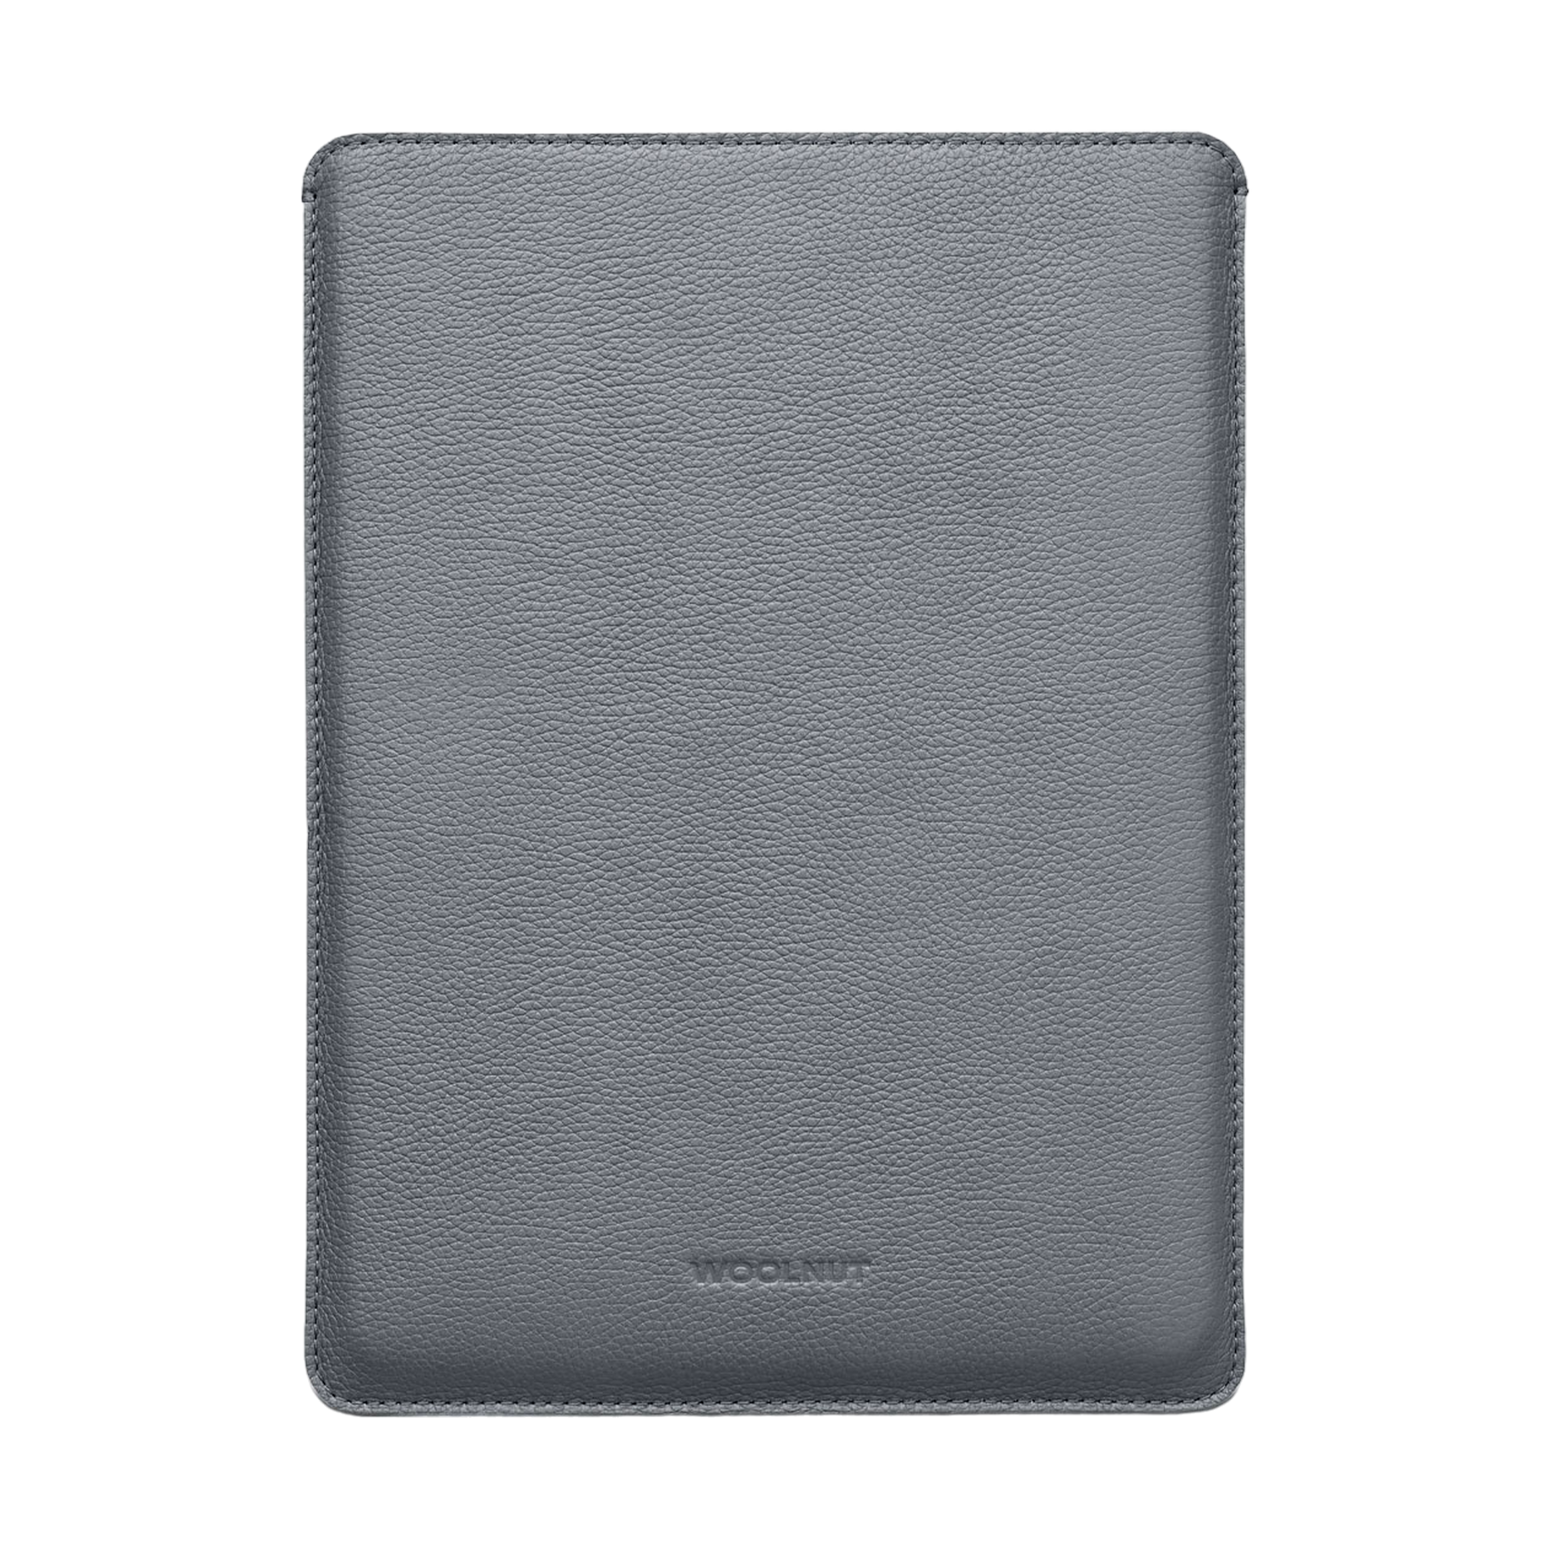 WOOLNUT Leather Sleeve for 14-inch MacBook Pro - Grey